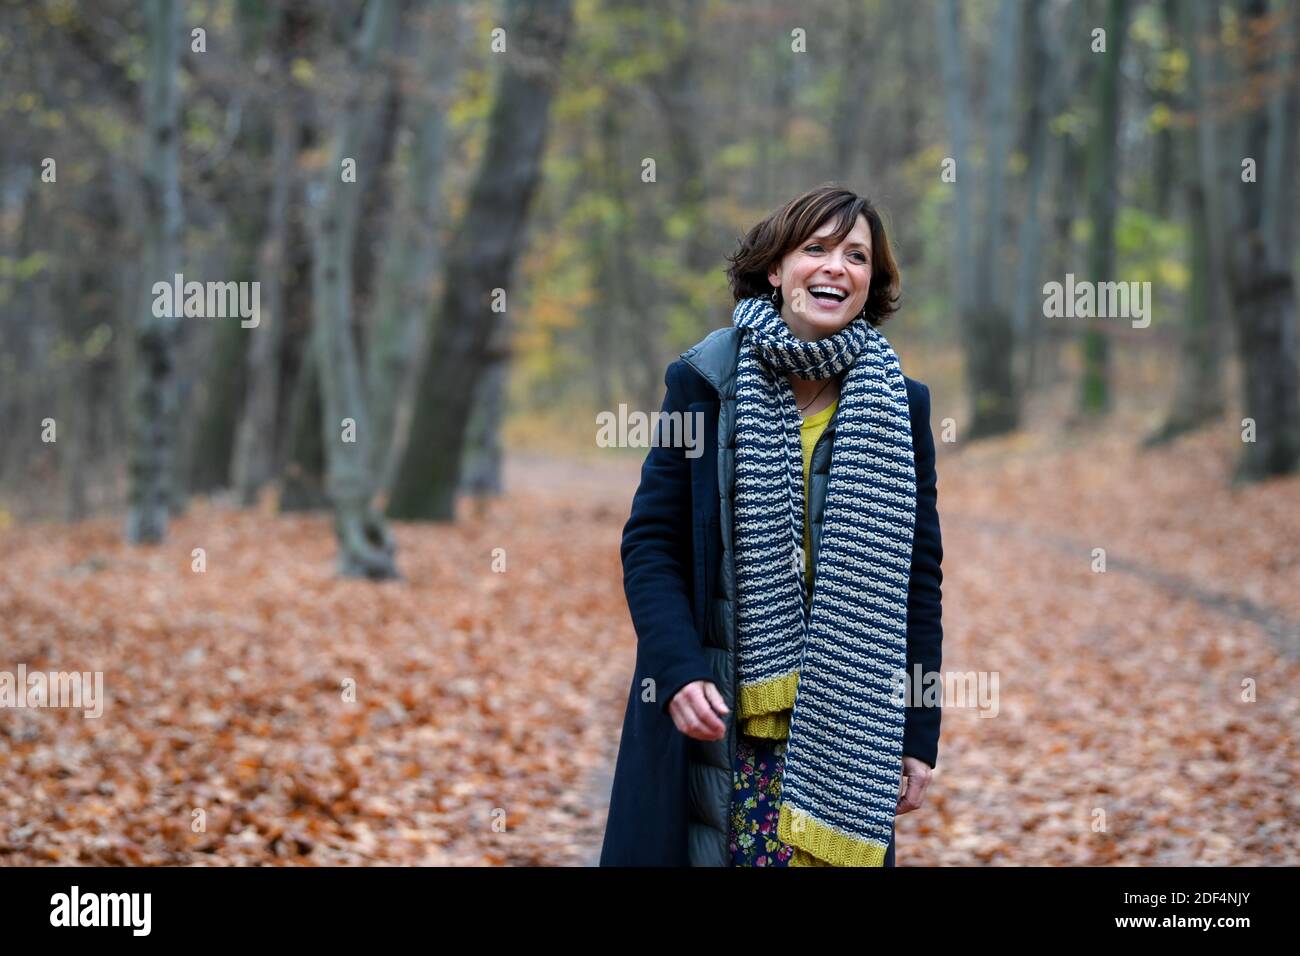 Berlin, Germany. 30th Nov, 2020. The actress Julia Brendler during a walk in the park Schönholzer Heide in Niederschönhausen She plays the leading role in the film of the ZDF series 'Katie Fforde: Emmas Geheimnis', which will be broadcast on 06.12.2020 at 20.15. Credit: Jens Kalaene/dpa-Zentralbild/ZB/dpa/Alamy Live News Stock Photo